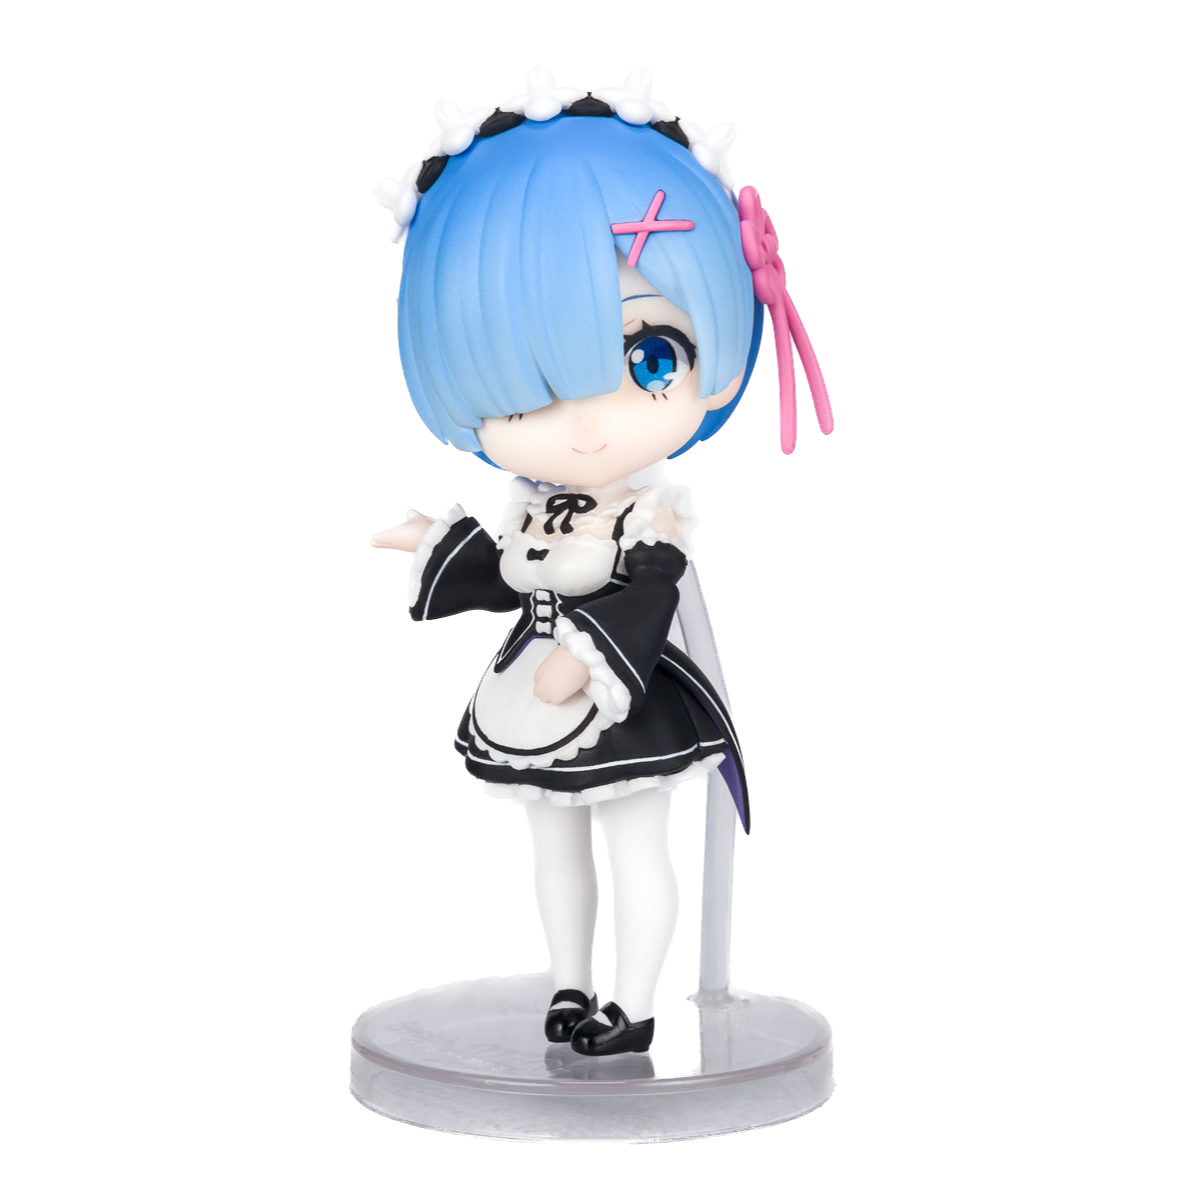 A 3.5-inch Figuarts mini Rem figure from "Re:Zero Starting Life in Another World", featuring lifelike eyes, squashed proportions, and interchangeable arms on a sturdy stand.